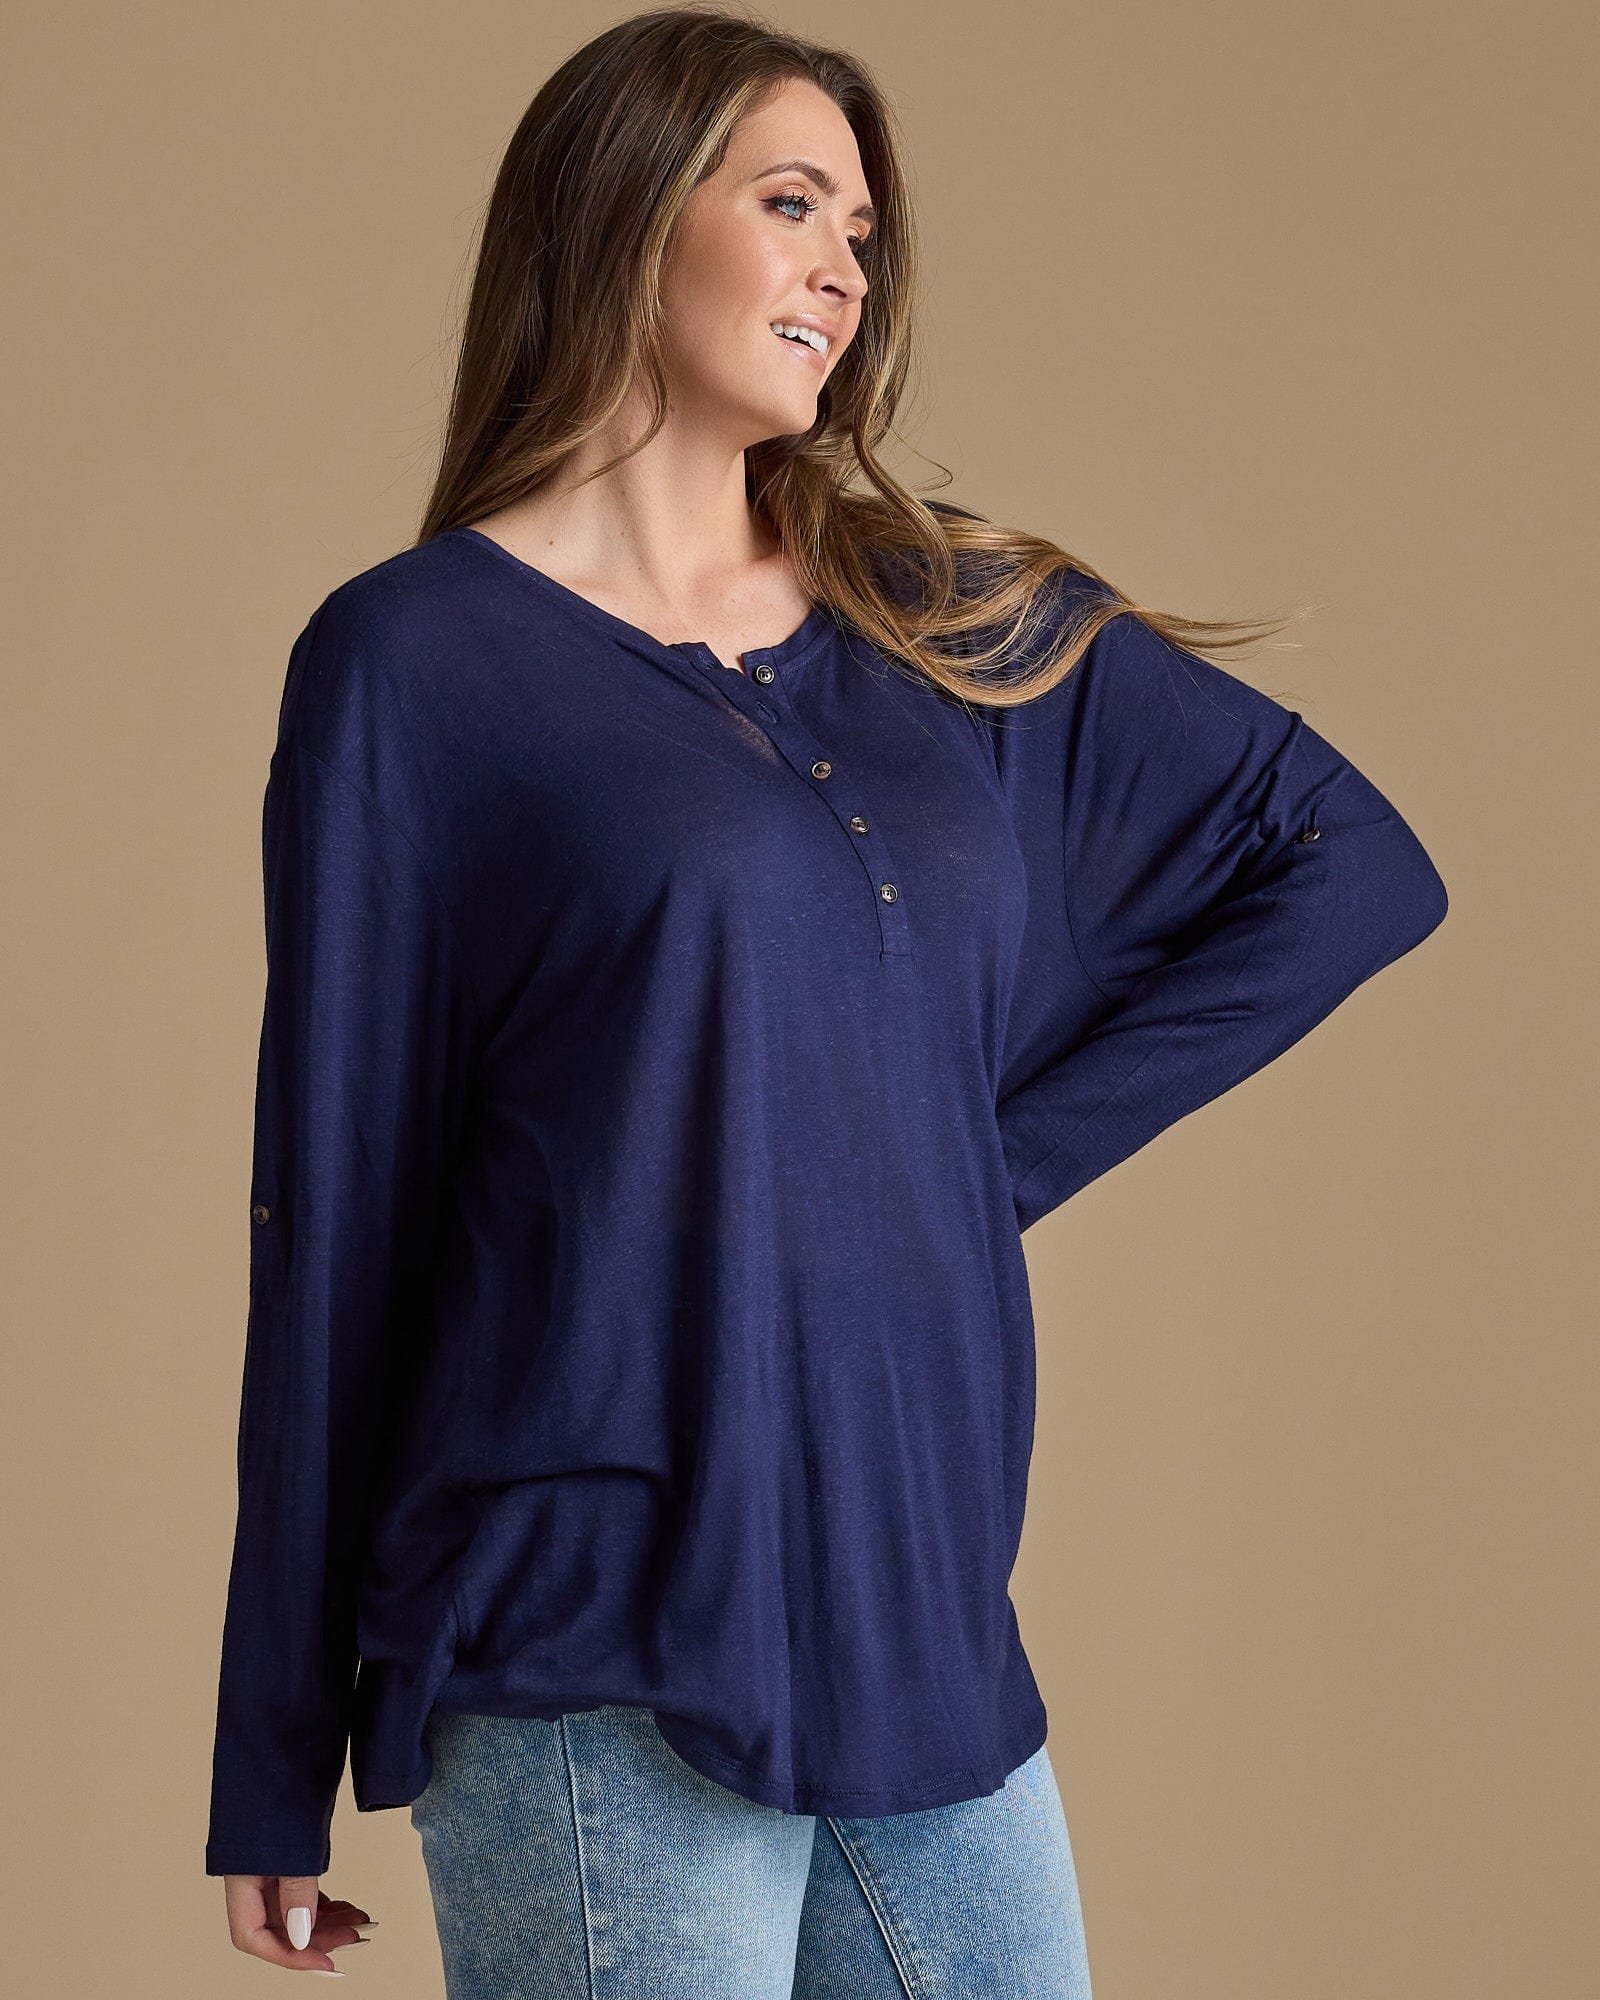 Woman in a navy, long sleeve, oversized, loose fitting blouse